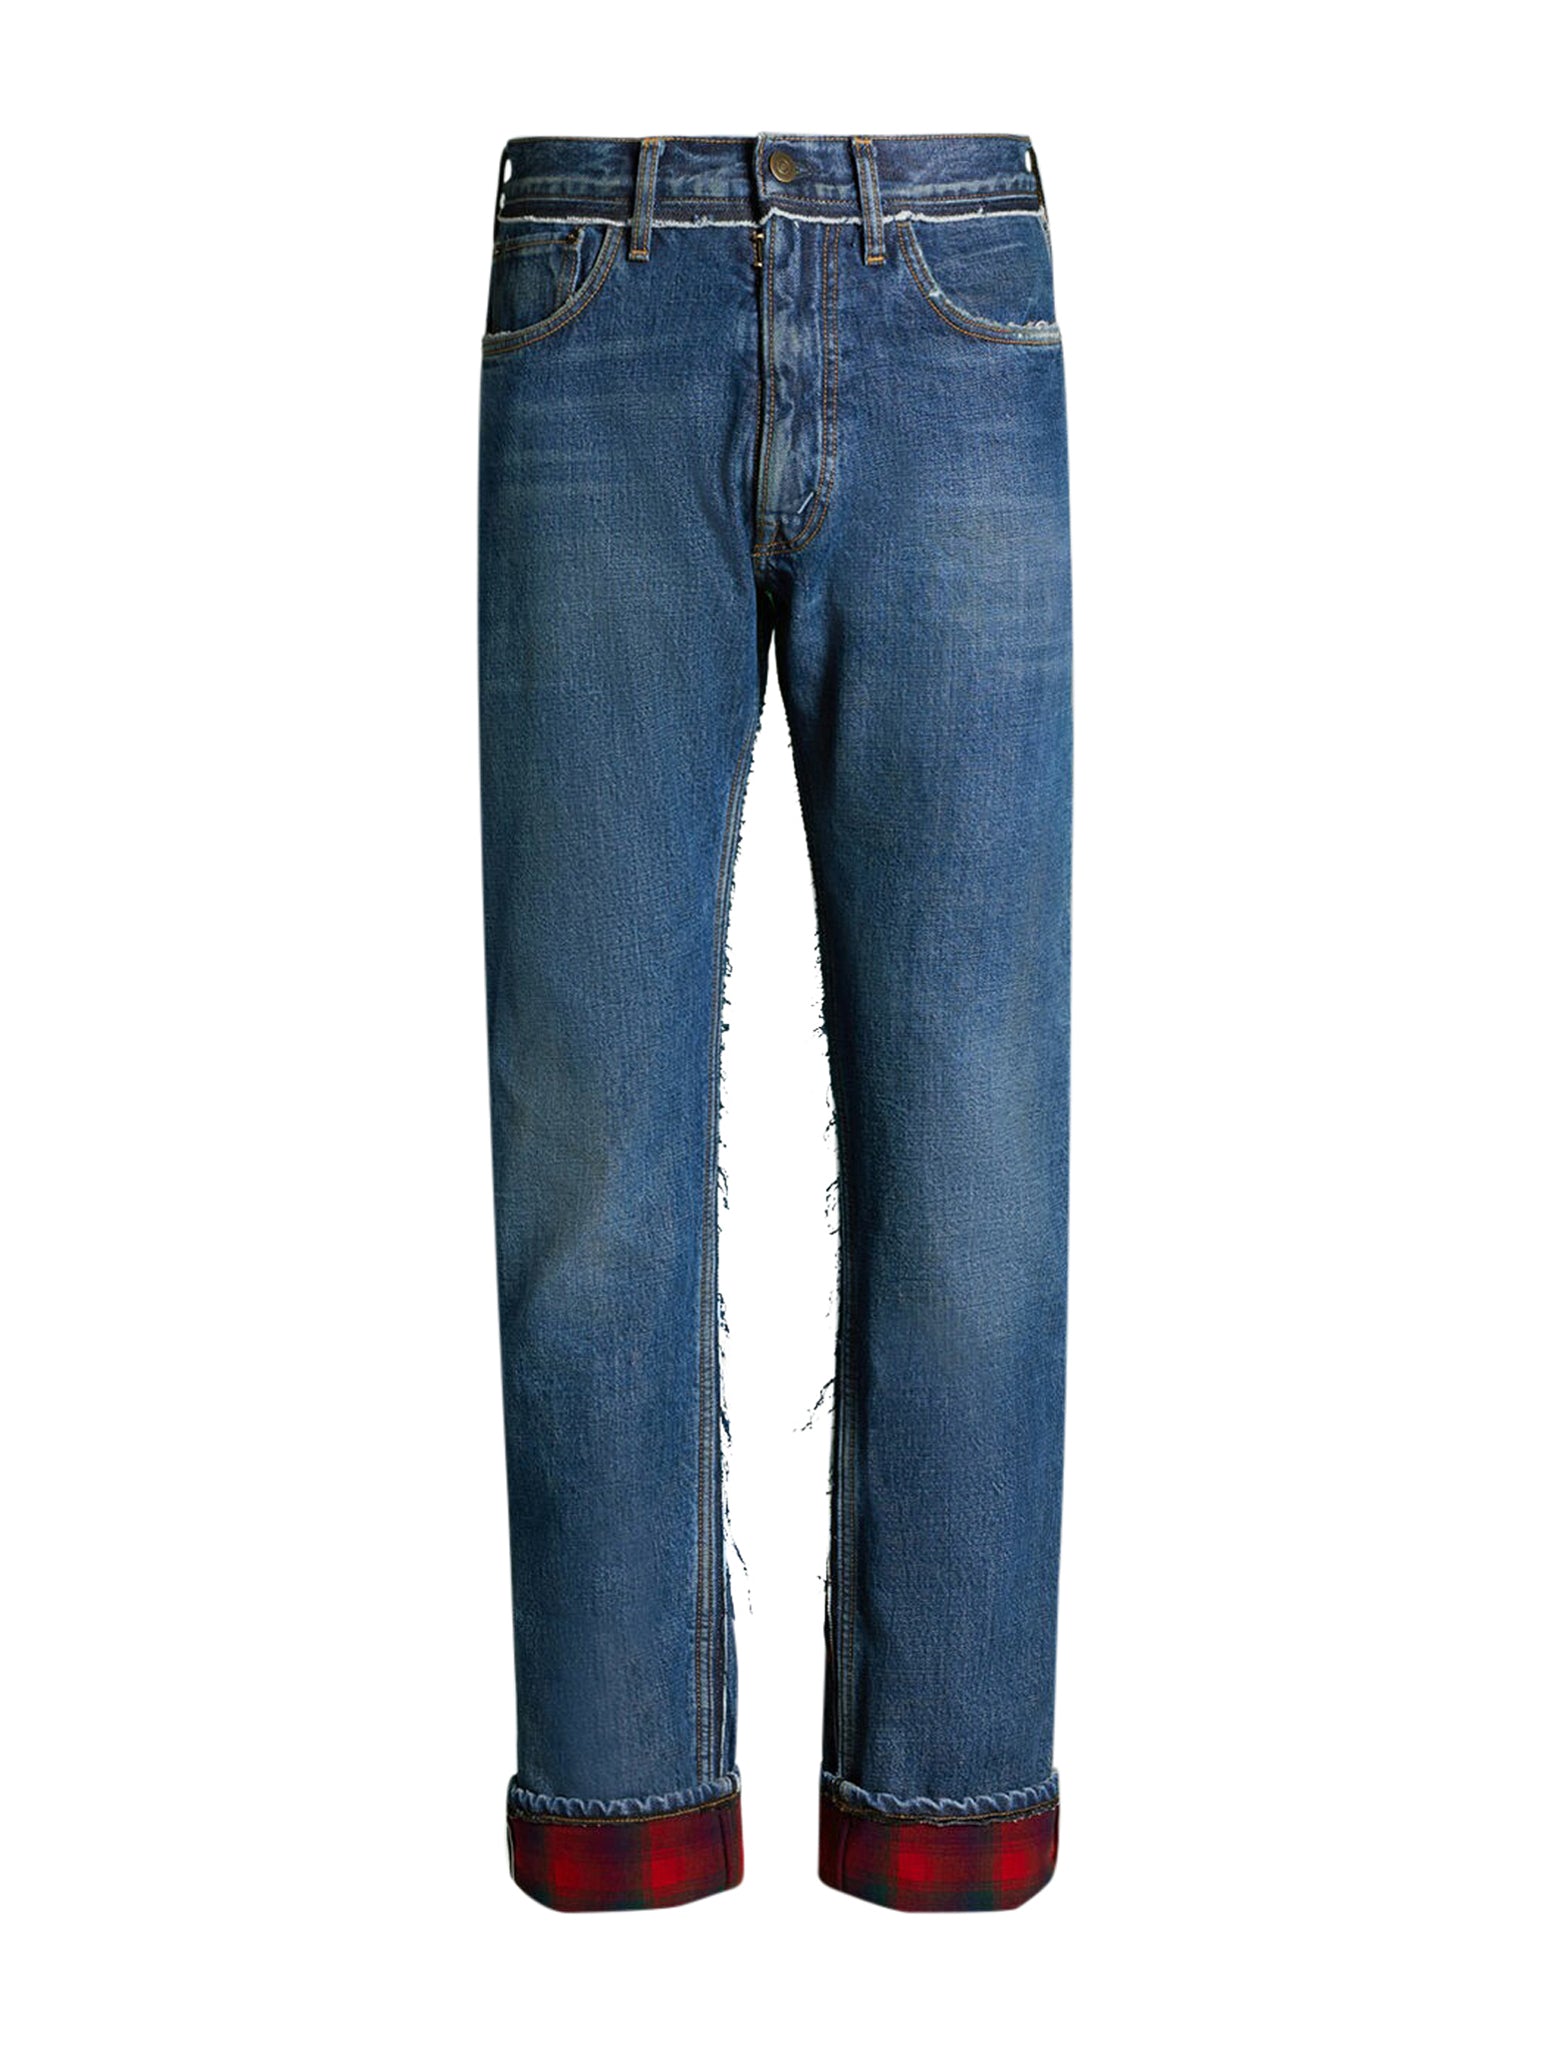 Jeans with Pendleton inserts